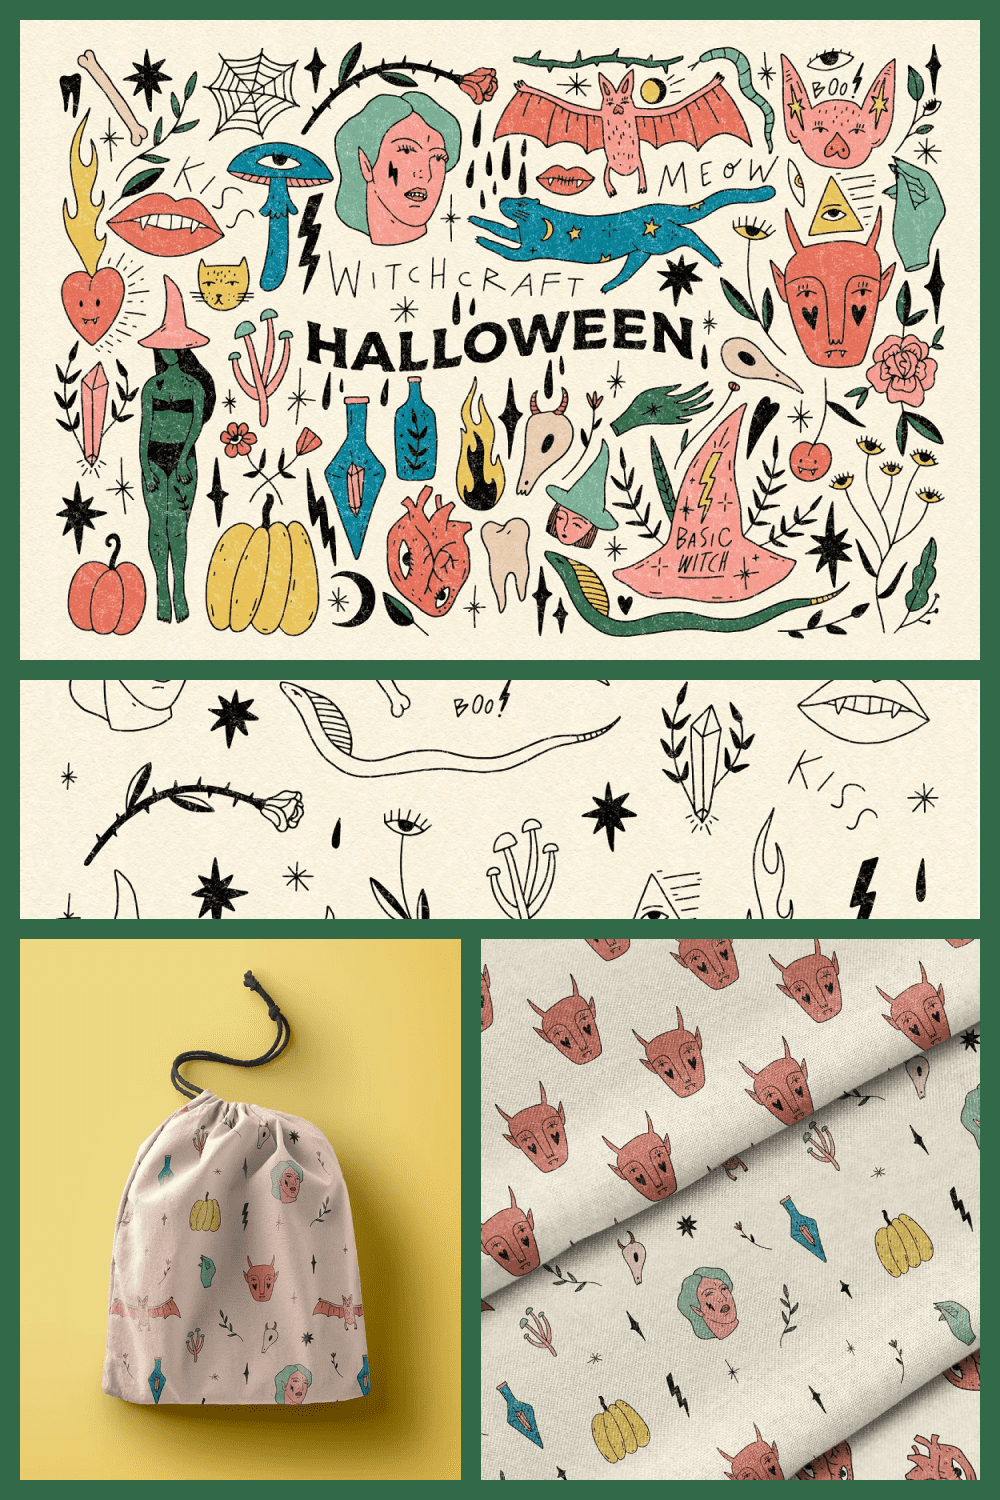 These are very modern illustrations that will look good for more than just Halloween.